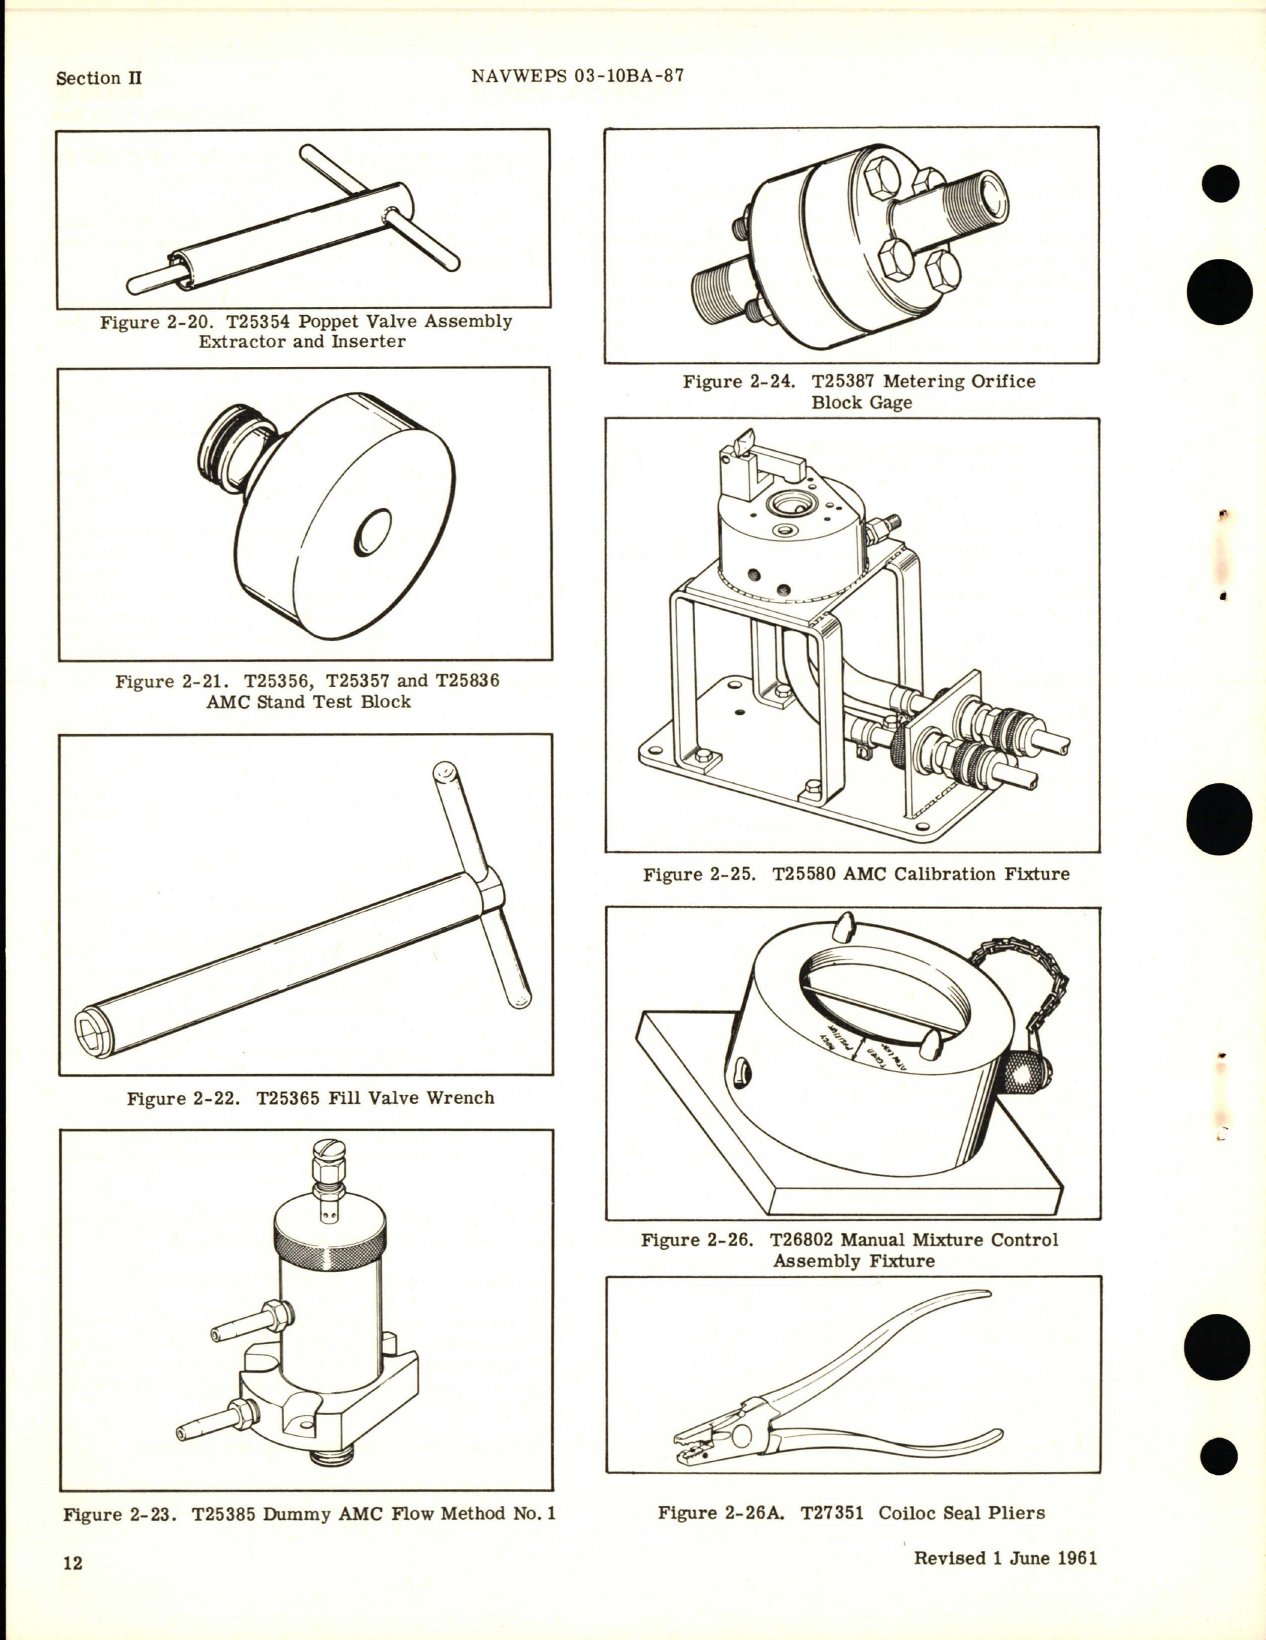 Sample page 8 from AirCorps Library document: Overhaul Instructions for Injection Carburetor - Model PR-58E5